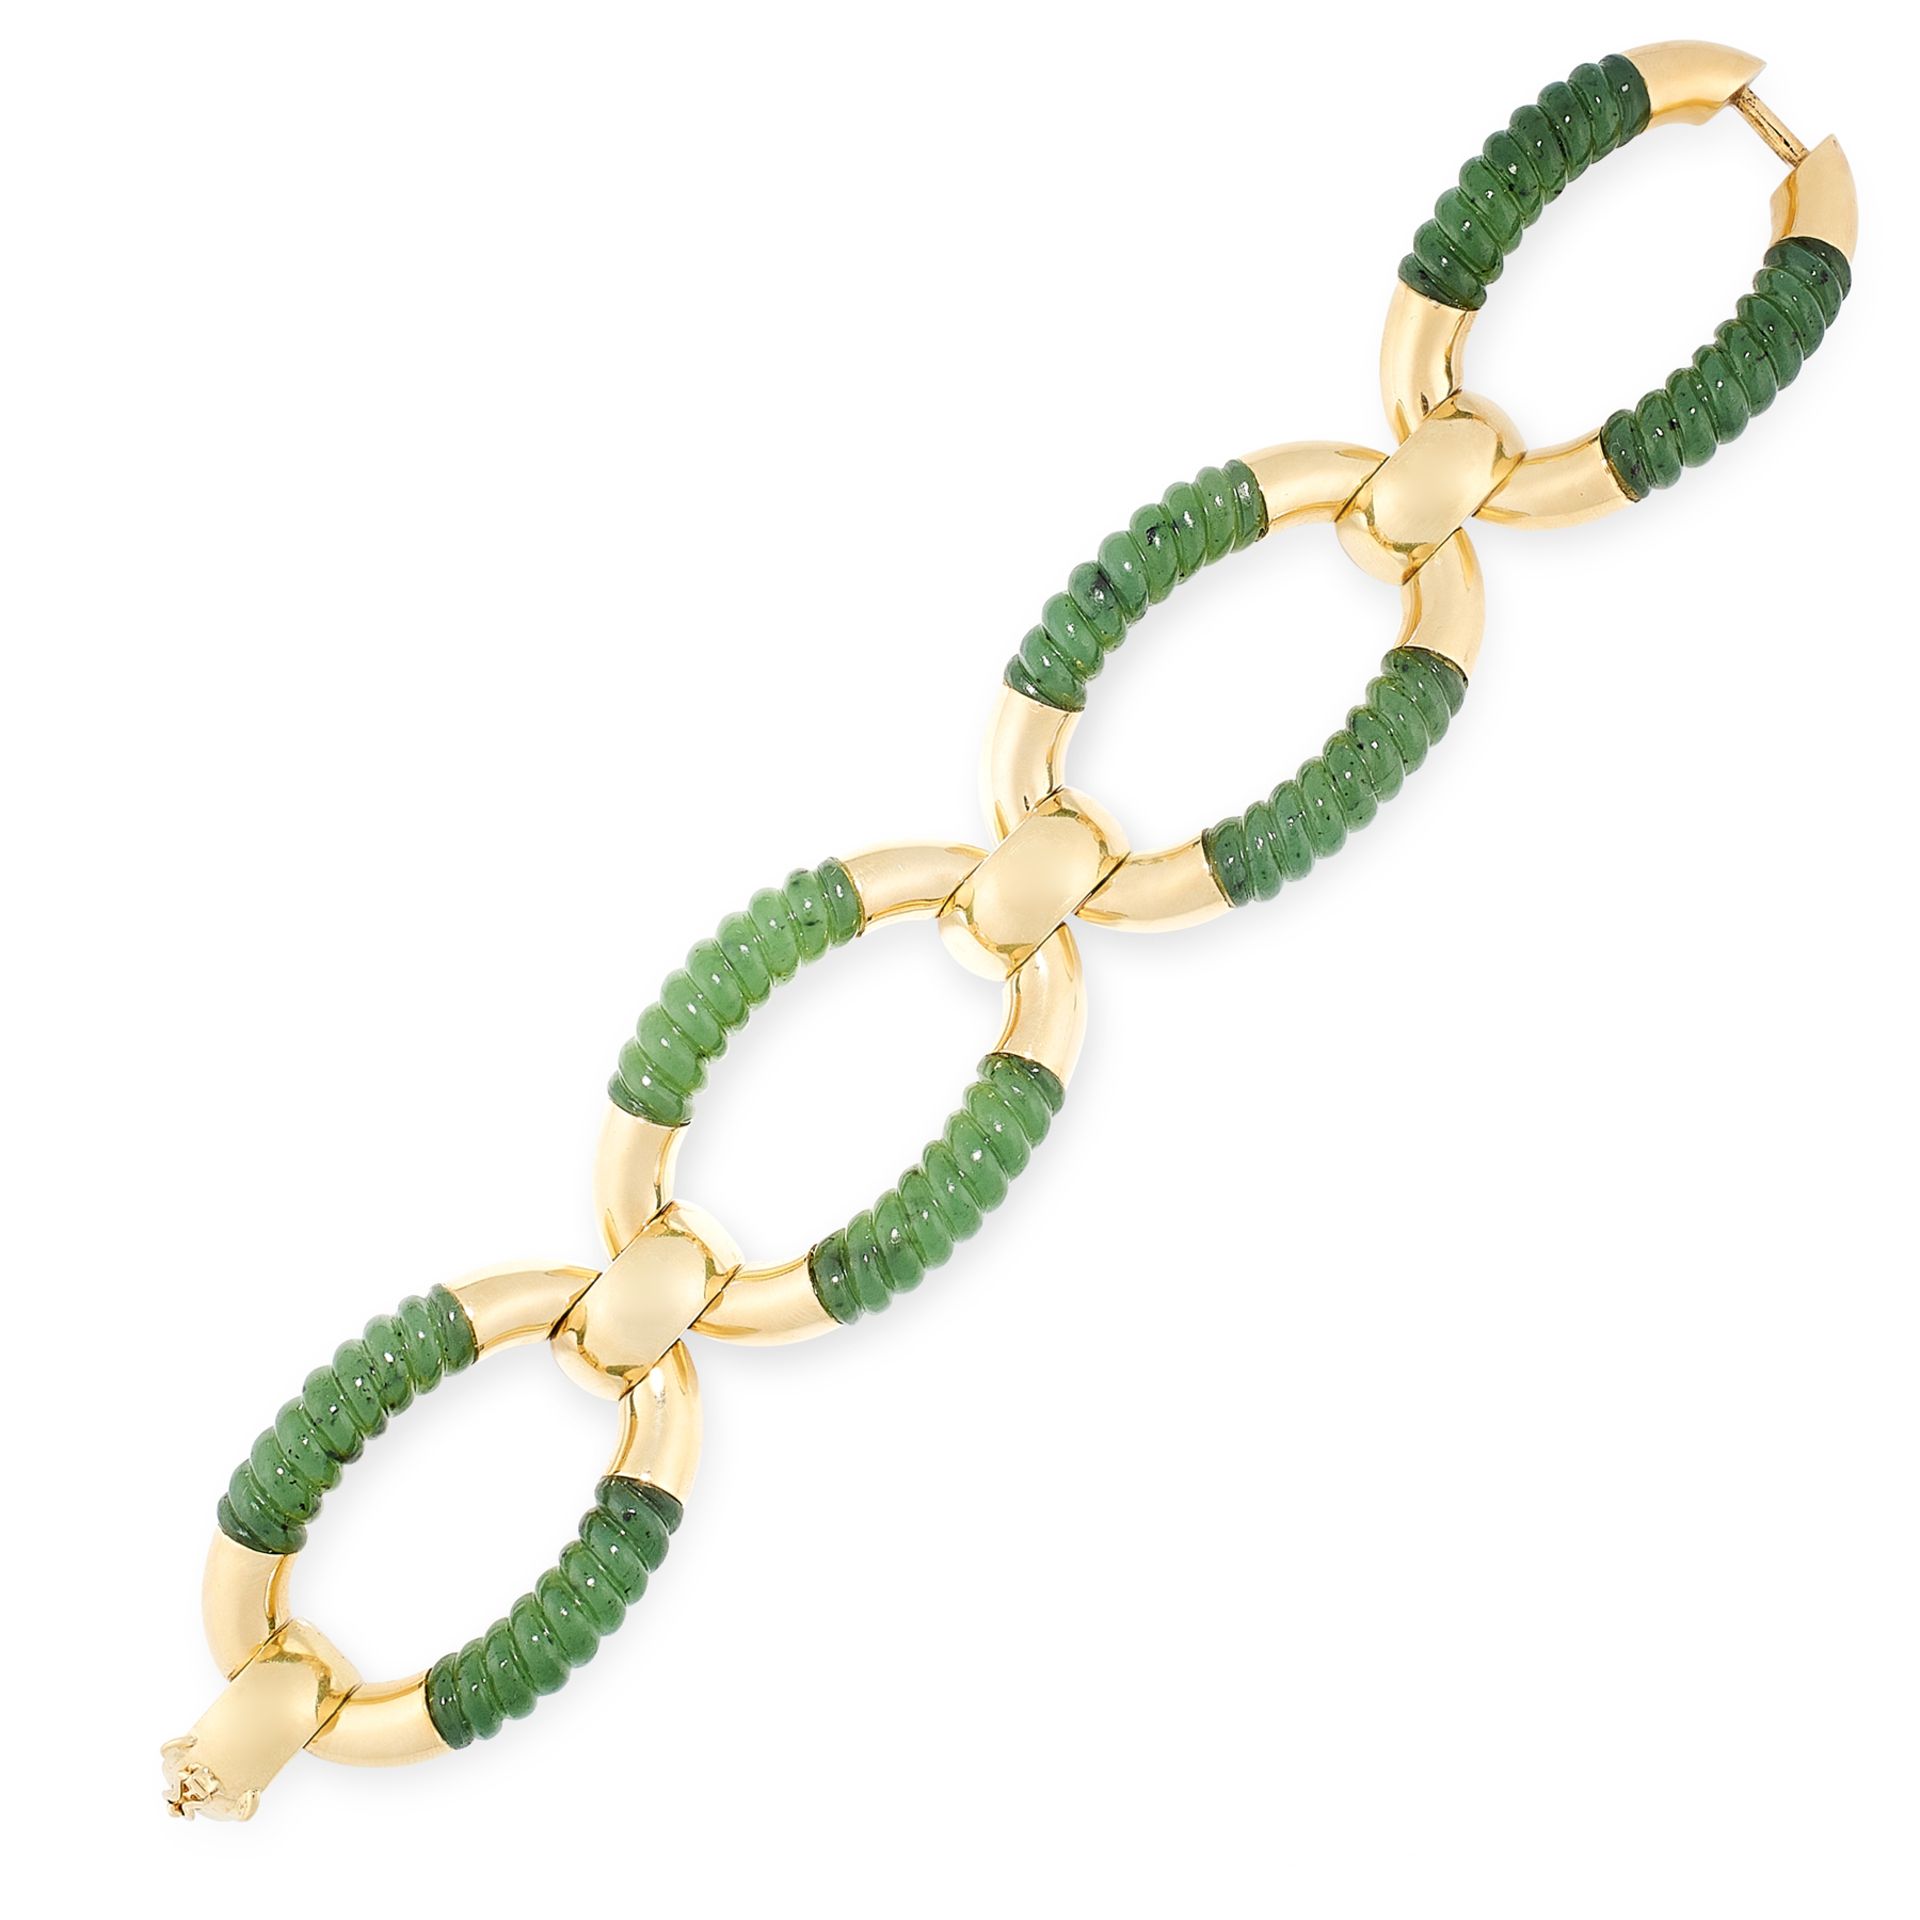 A VINTAGE NEPHRITE BRACELET in 18ct yellow gold, the oval links formed of reeded carved nephrite